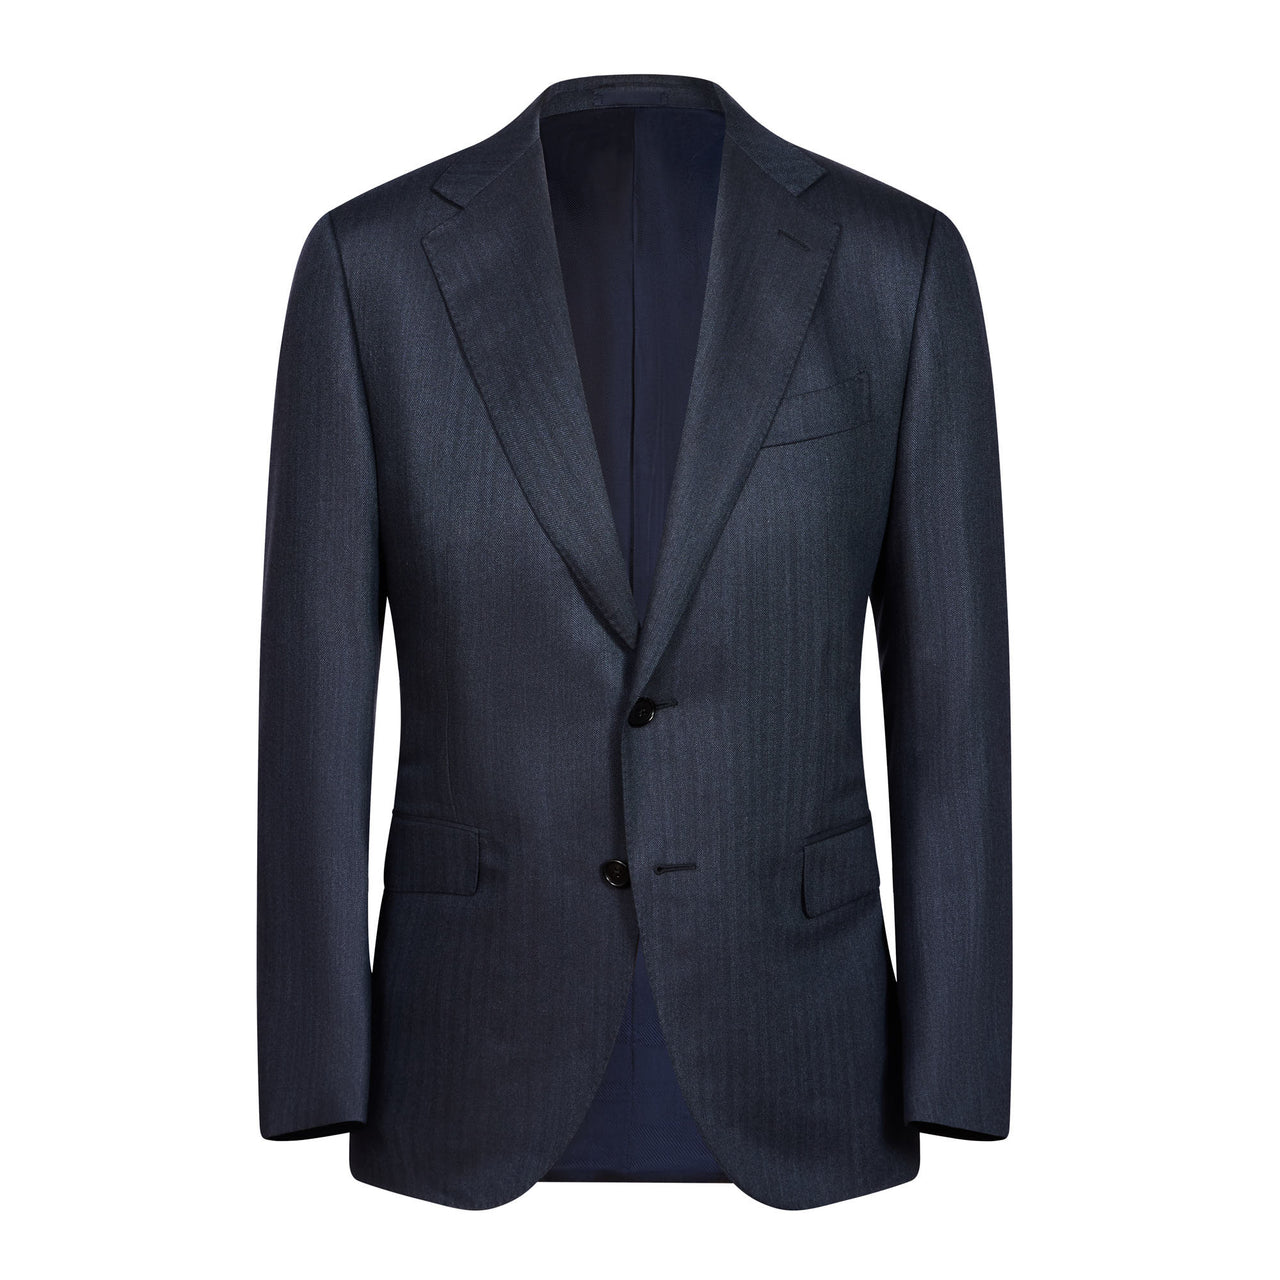 HENRY SARTORIAL X CARUSO Single Breasted 2 Button Norma Suit CHARCOAL REG